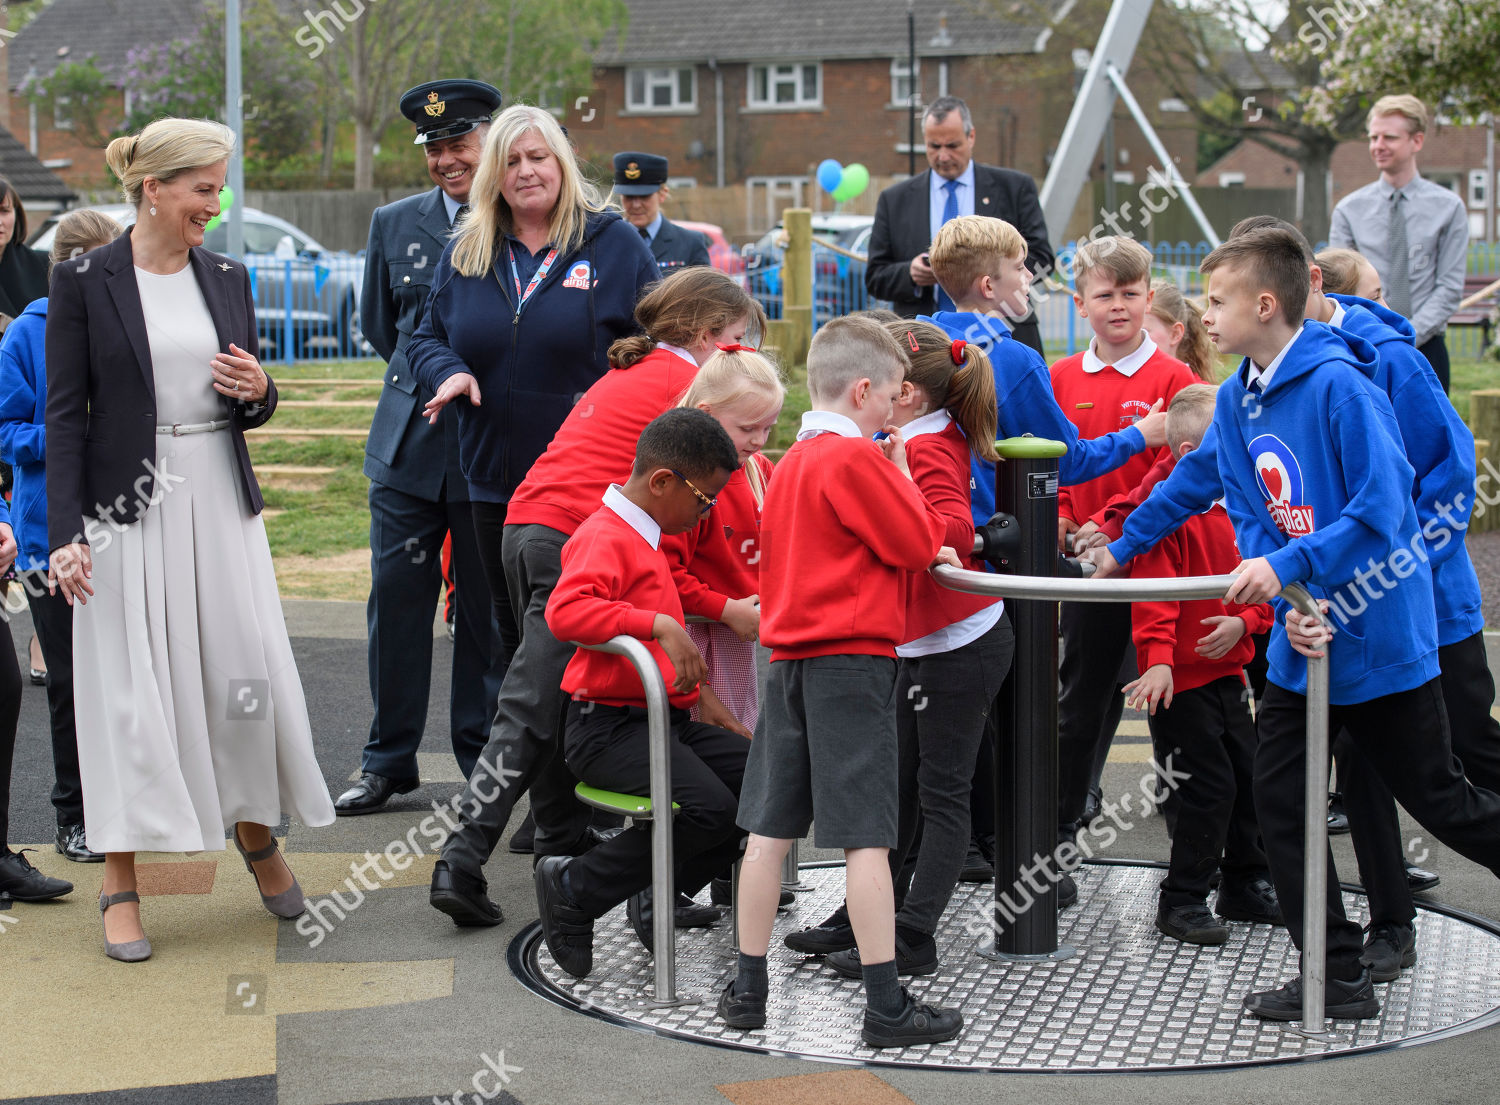 sophie-countess-of-wessex-opens-airplay-play-park-wittering-village-peterborough-uk-shutterstock-editorial-10217568ab.jpg